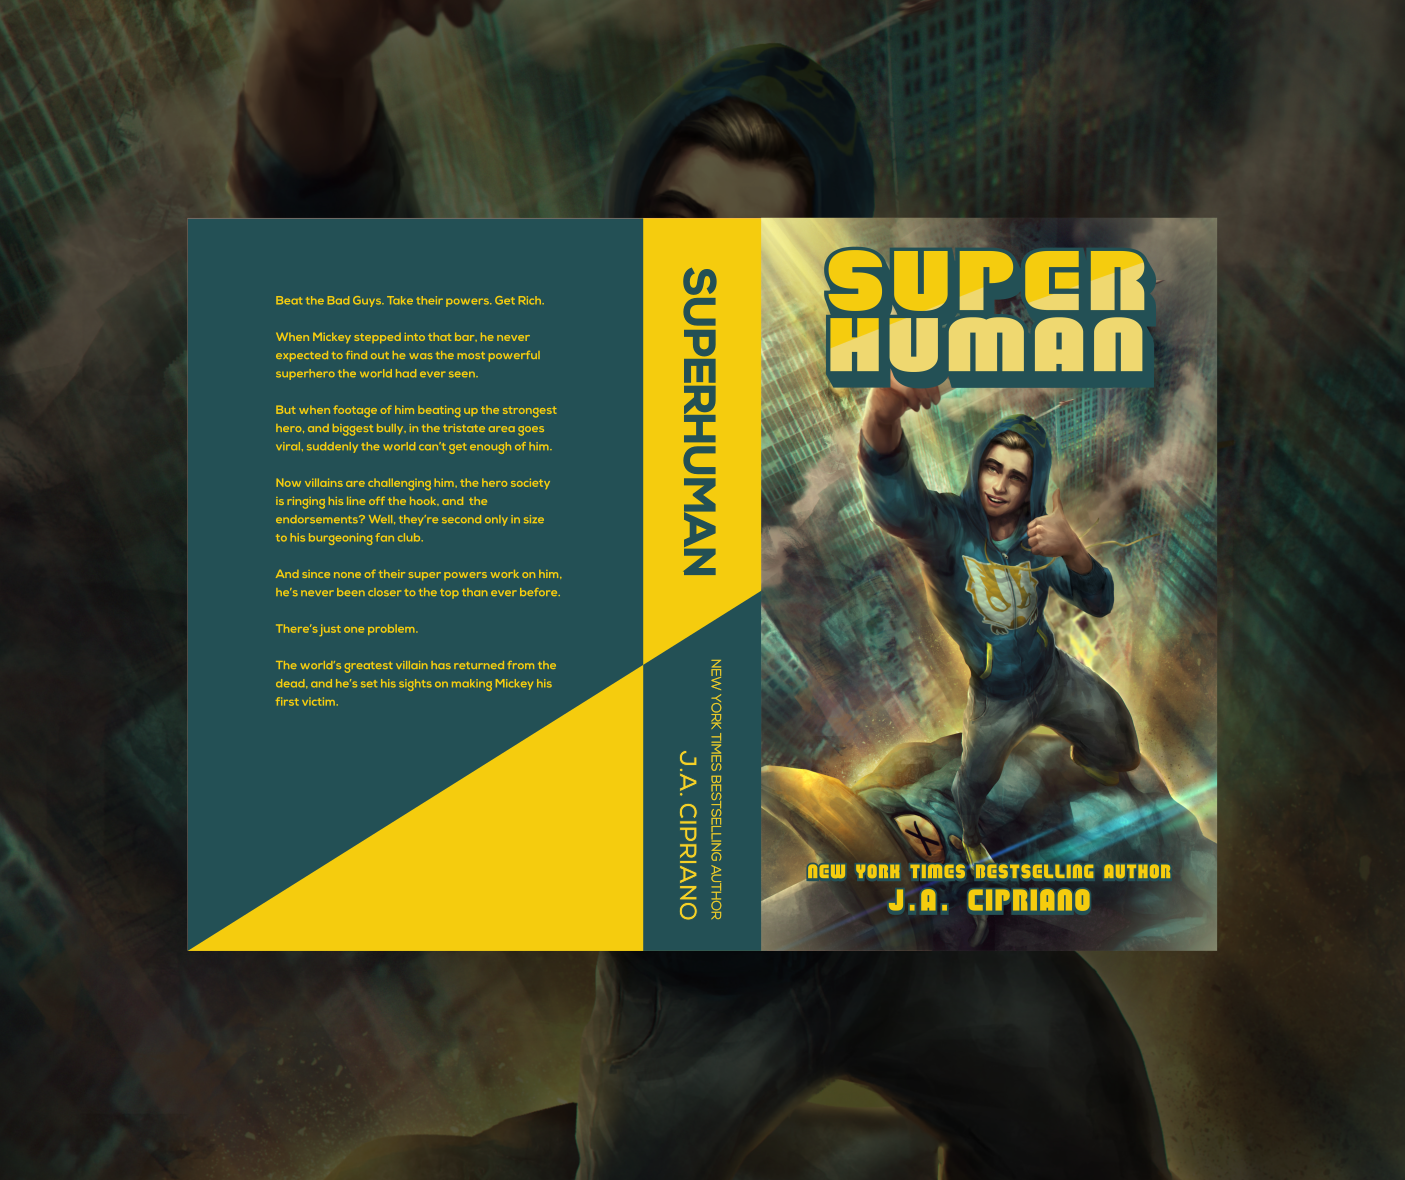 Book cover design for Superhuman. Designed by Johnery